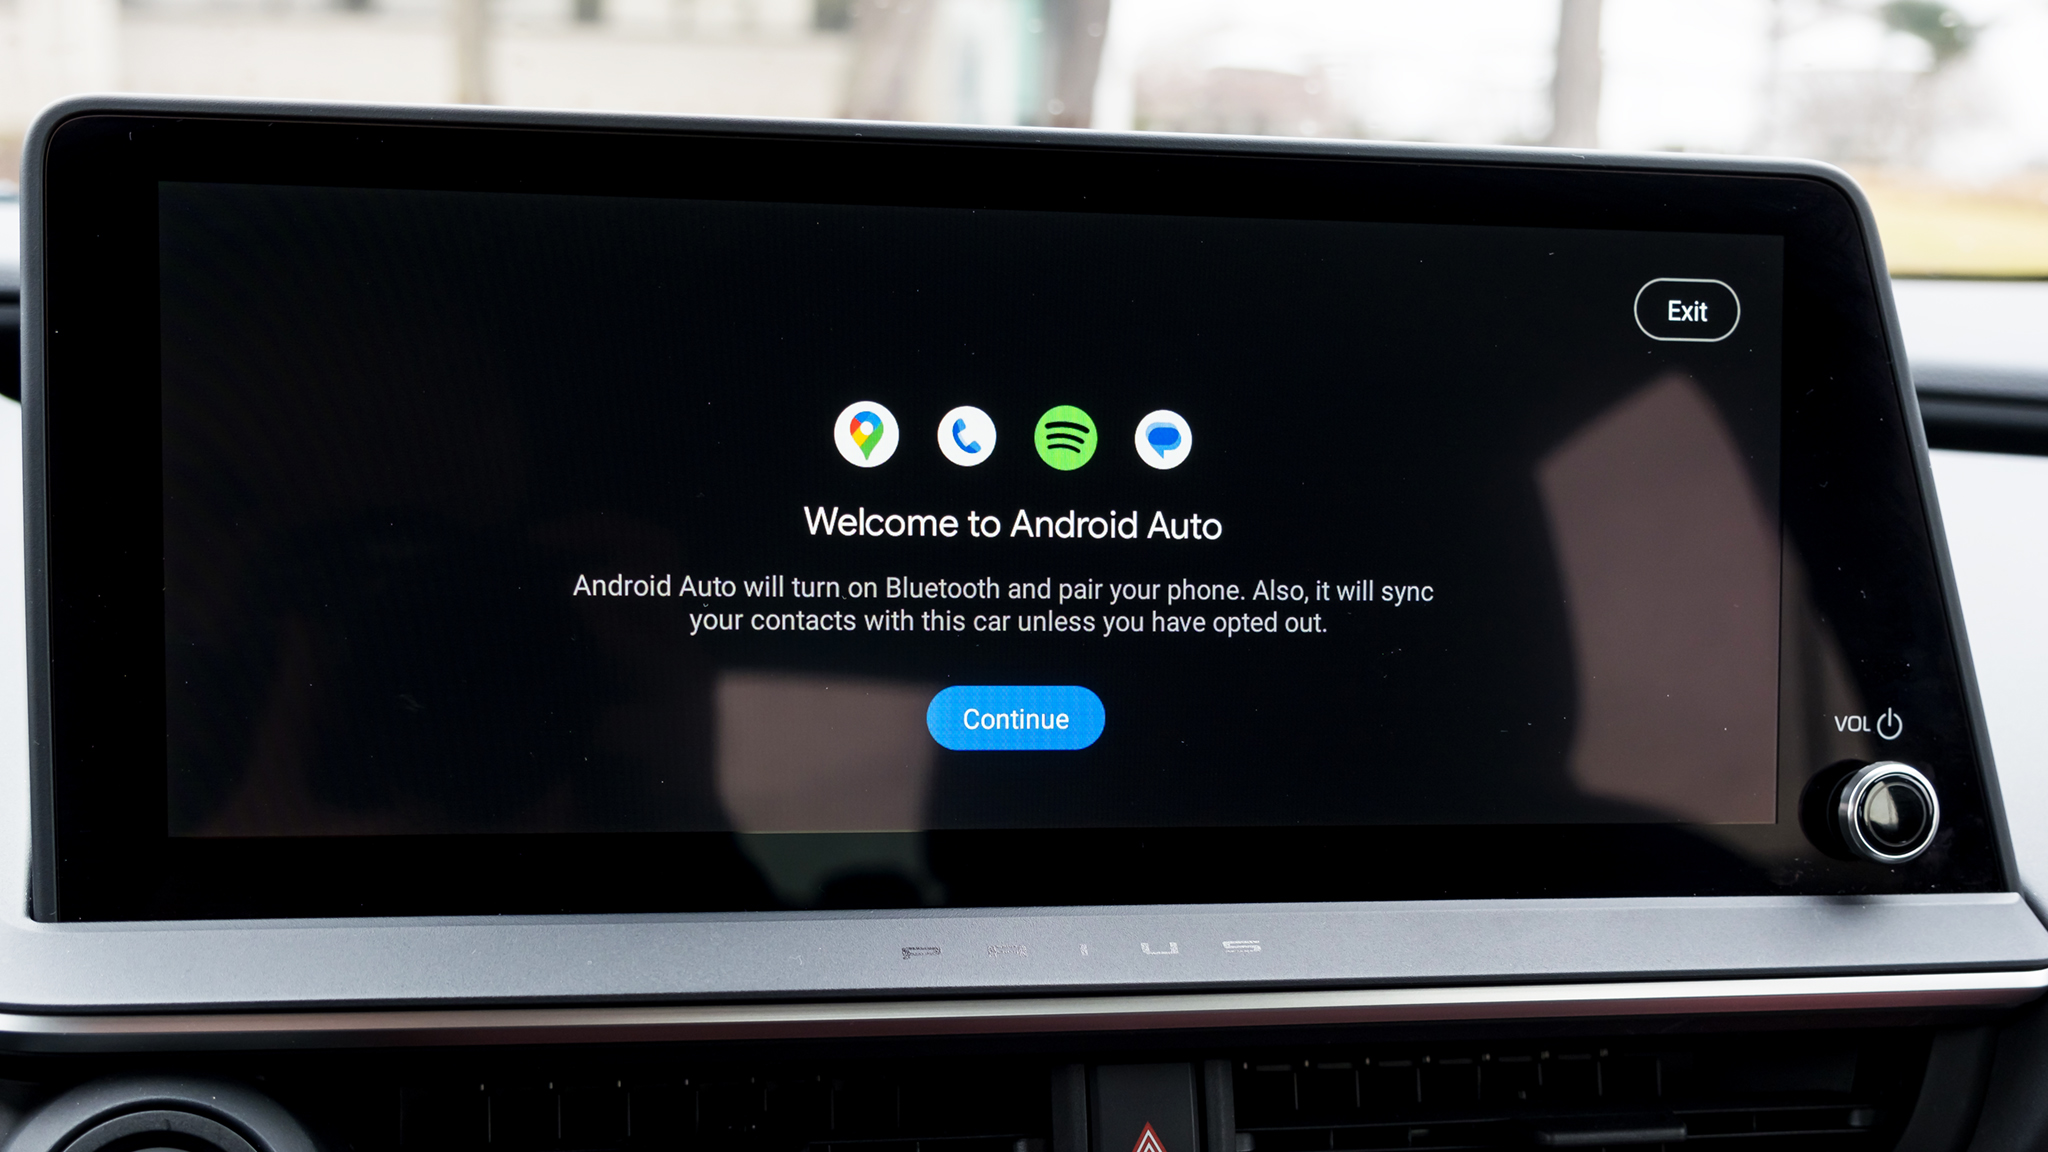 There is a multitude of things you can do with Android Auto